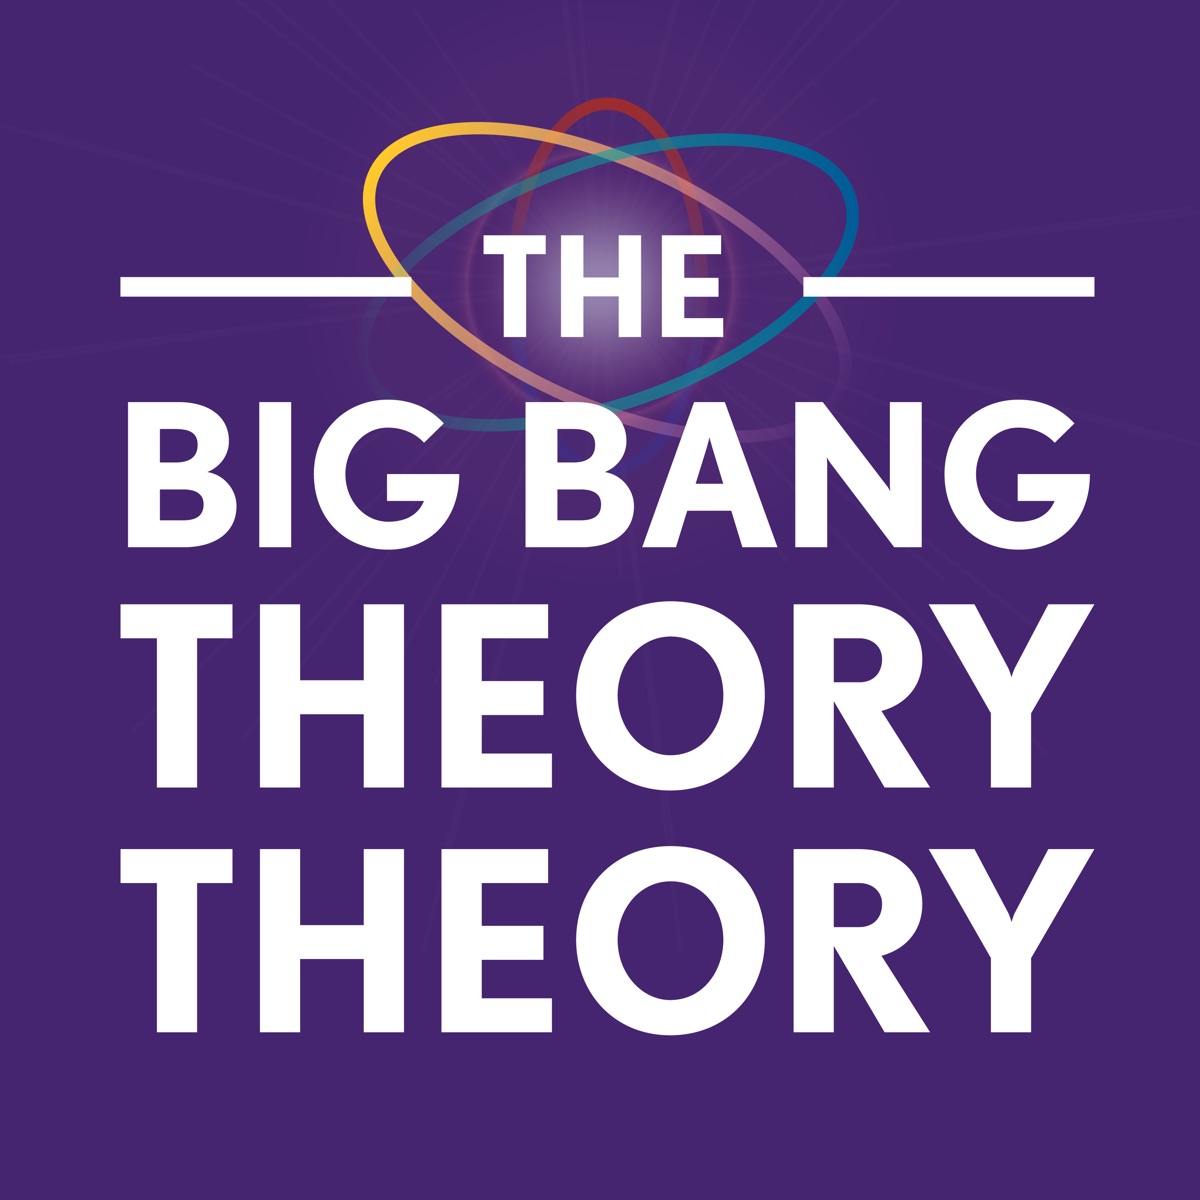 The Big Bang Theory Theory â€“ Podcast â€“ Podtail